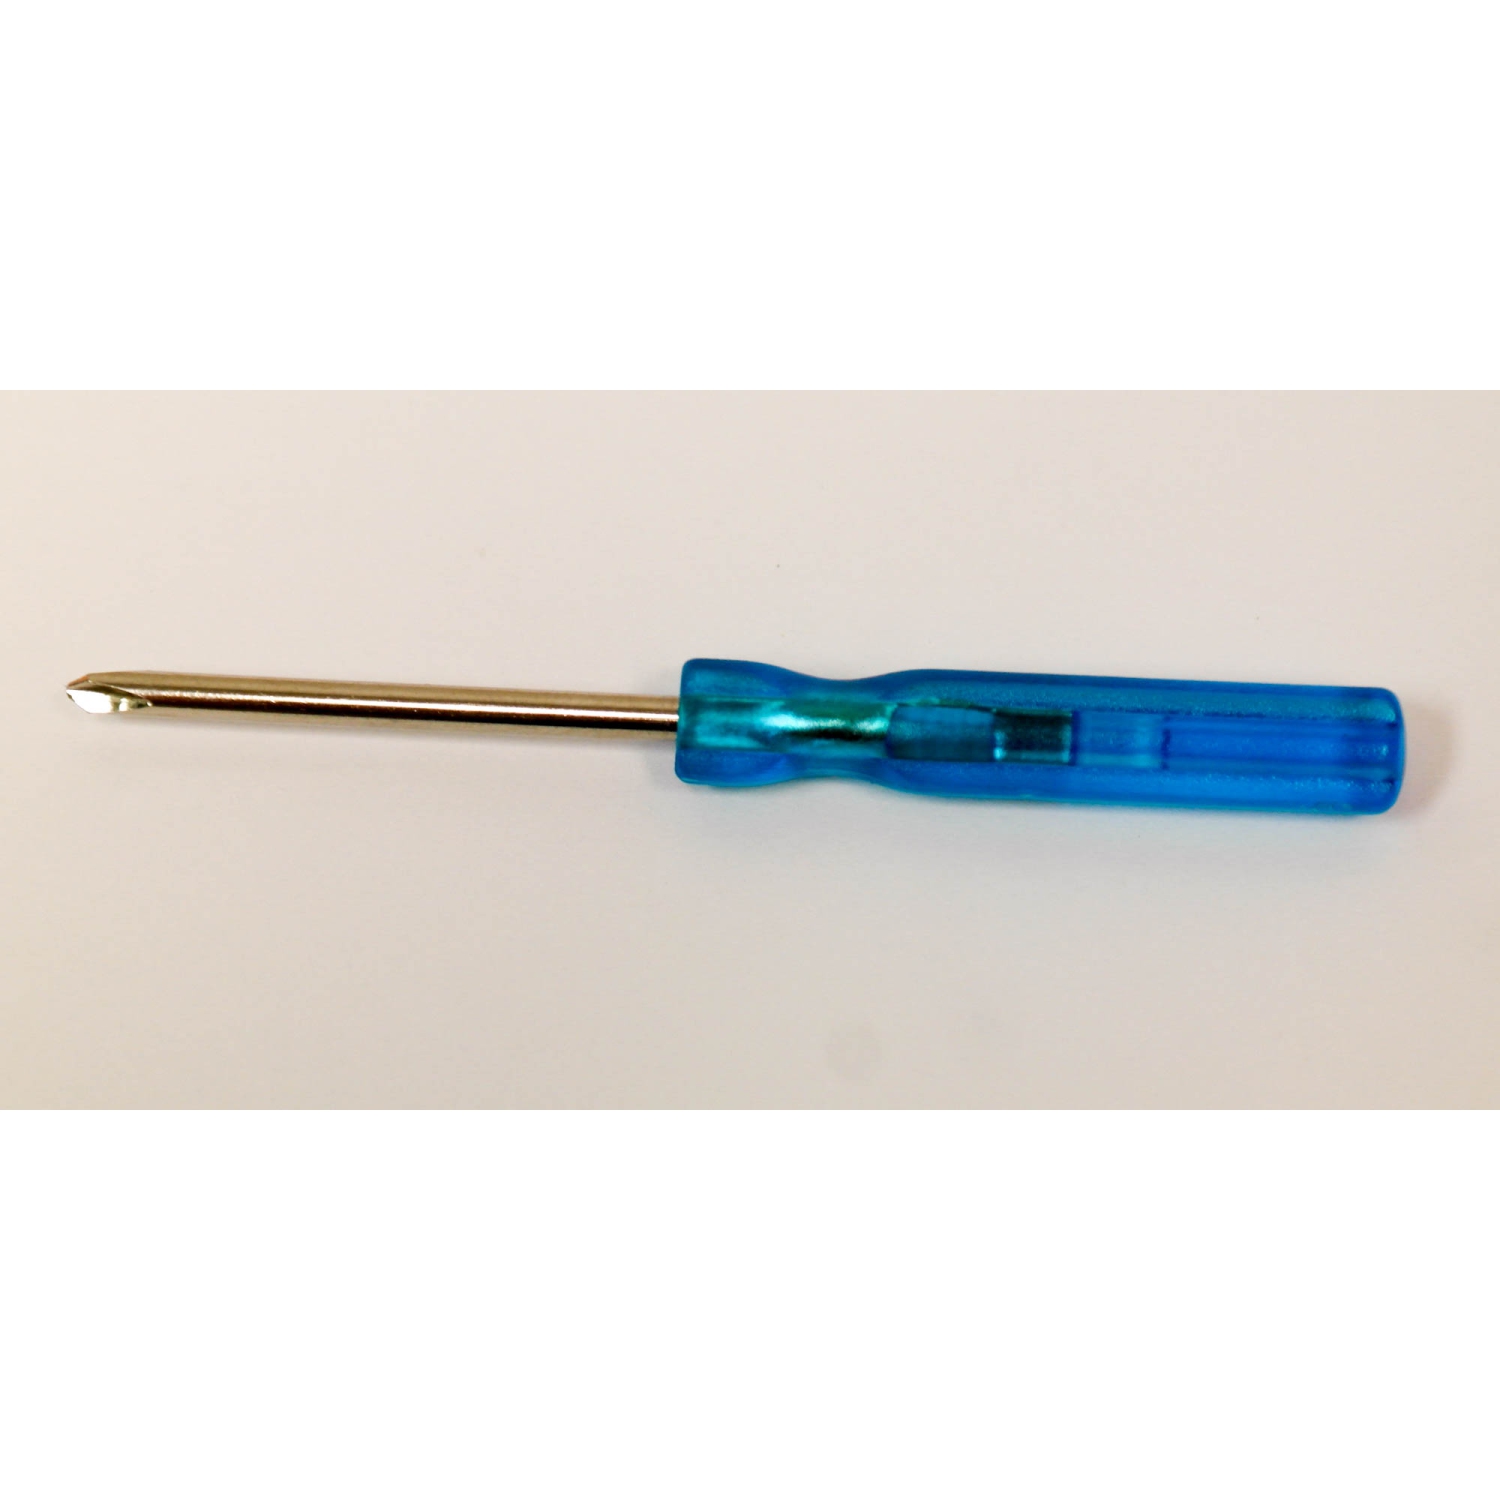 Triwing Screwdriver for Nintendo Original DS, DS Lite, and GBA Gameboy Advance by Mars Devices